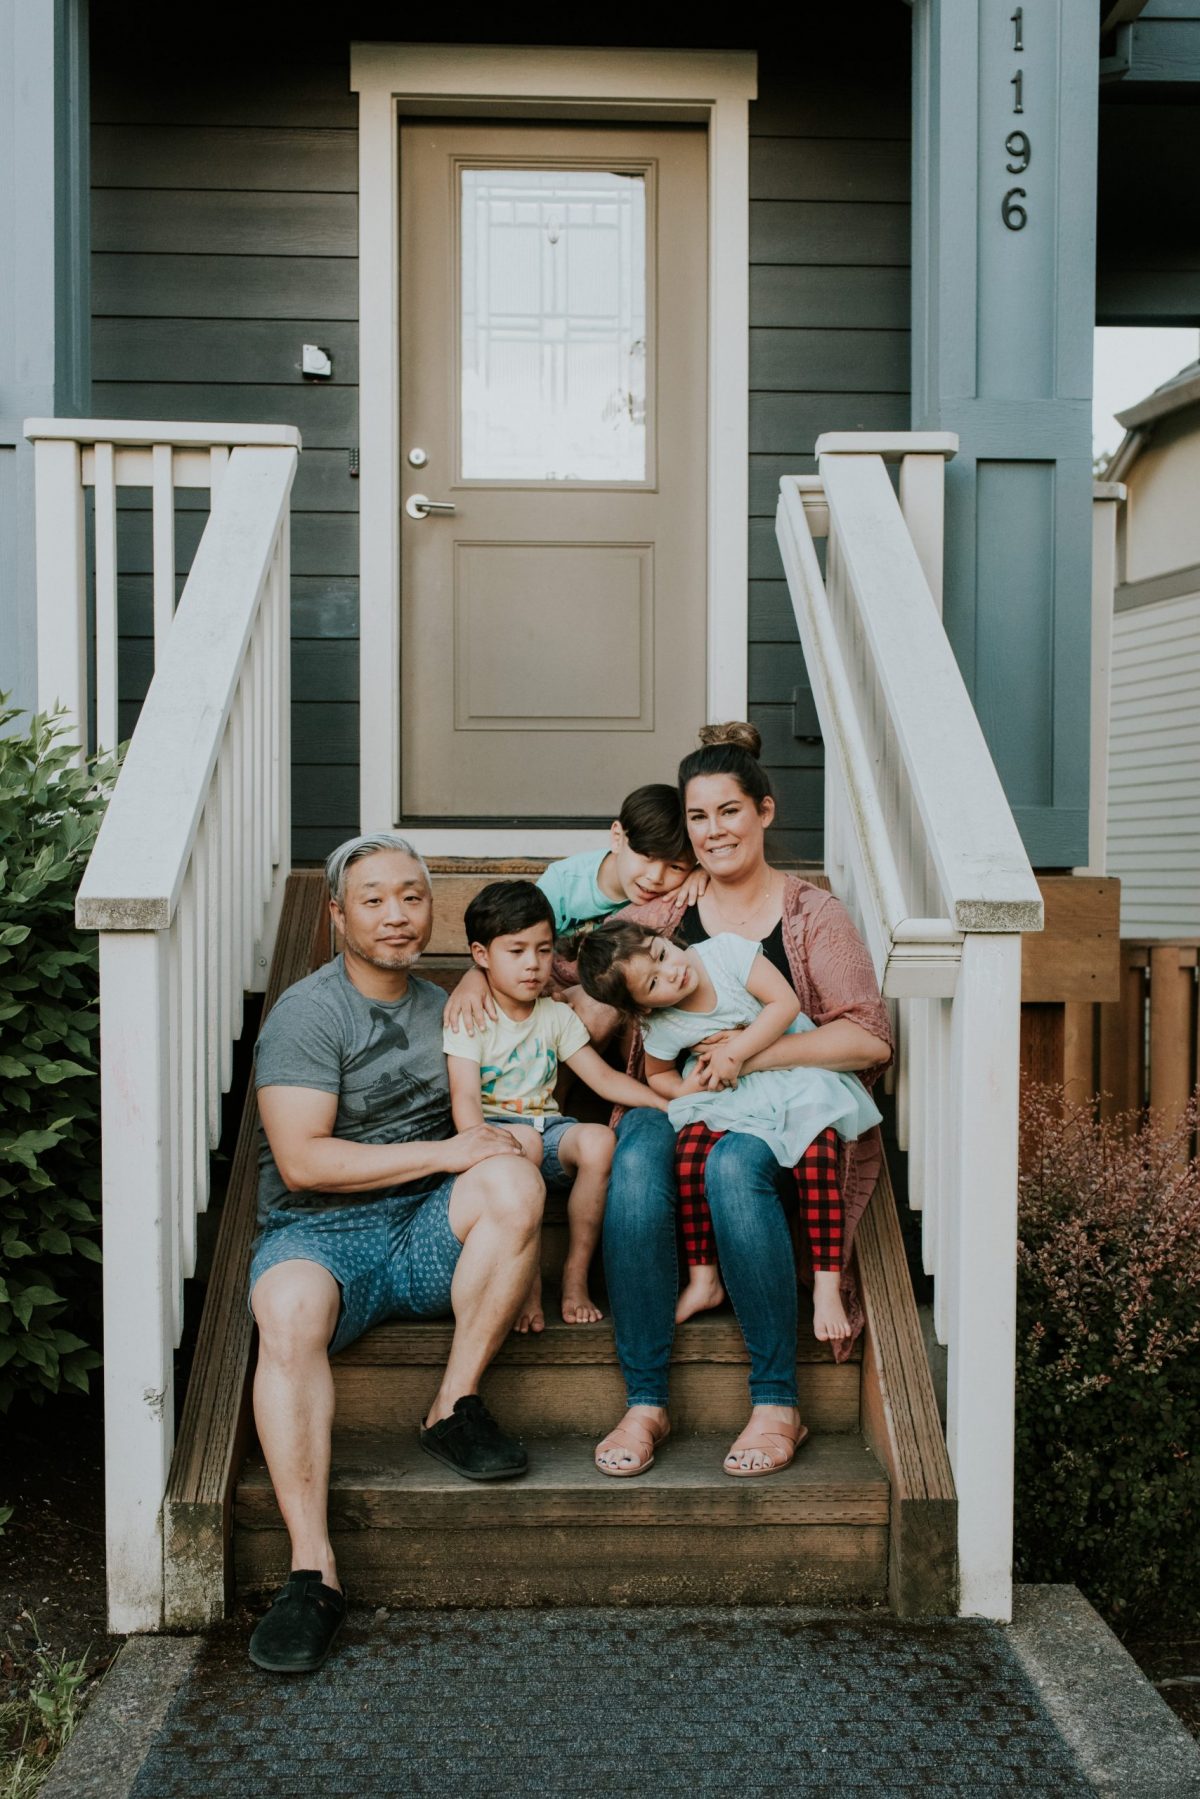 Family of father, mother, and three kids sitting on their front porch